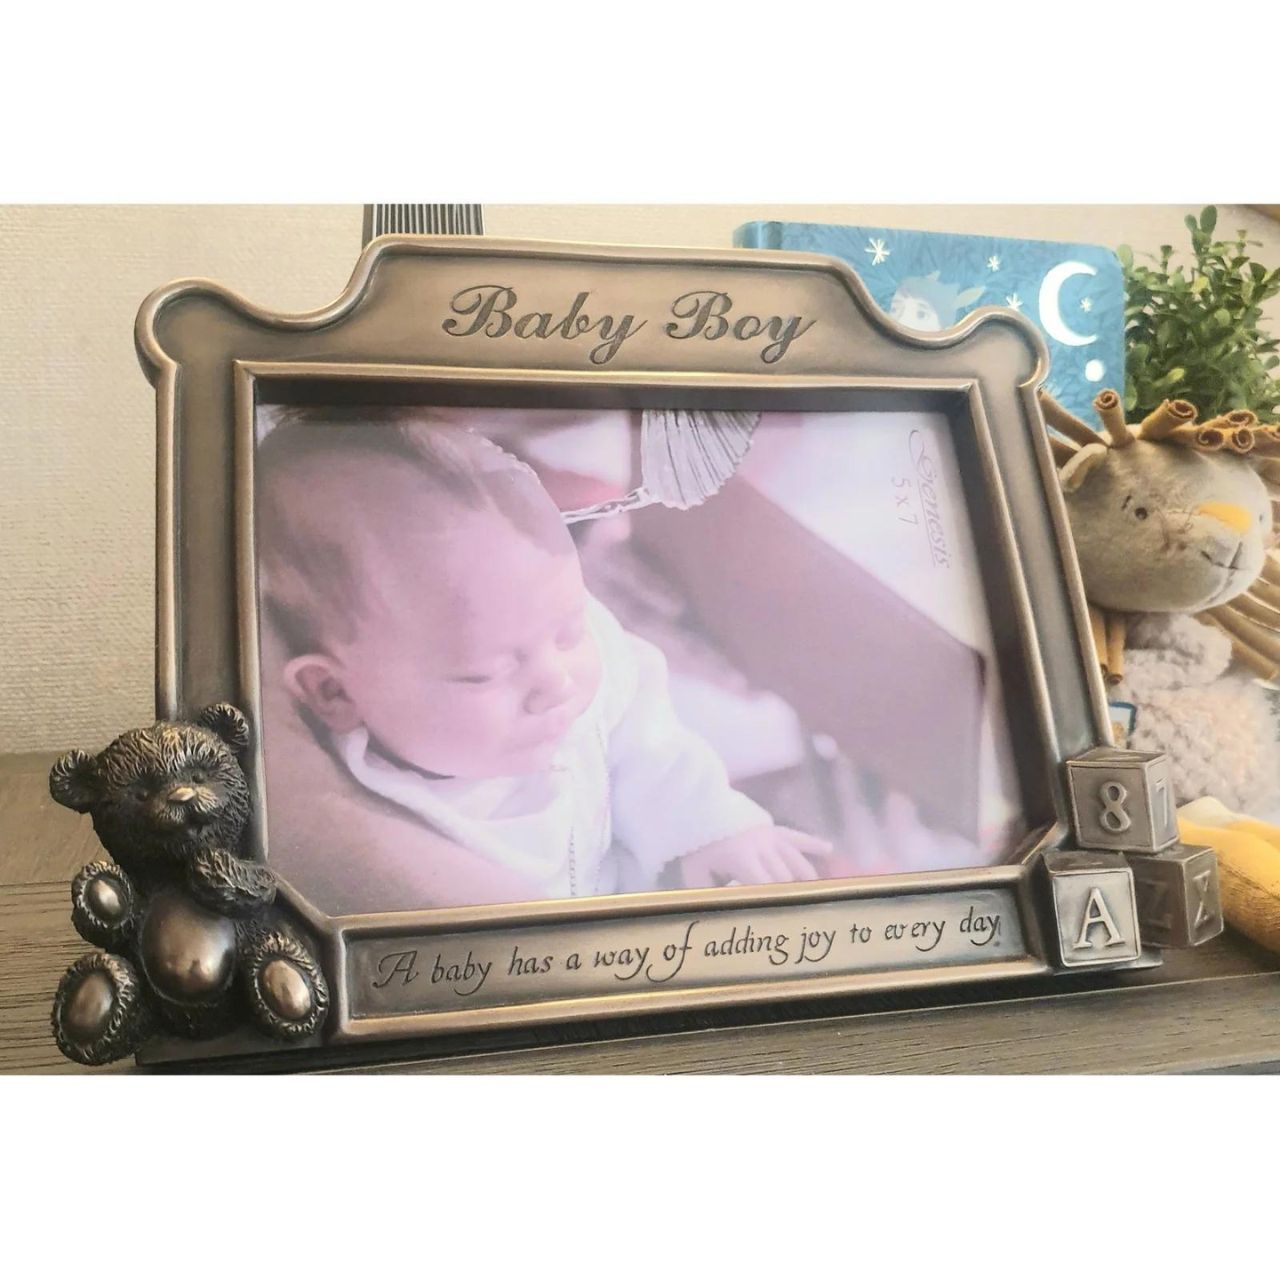 This beautiful photo frame comes with the message inscribed on the front ; "A baby has a way of adding joy to every day." The perfect gift for a new arrival or christening. It holds 5 x 7 photos, and is made of cold cast bronze, measuring; an overall 7" x 9''.